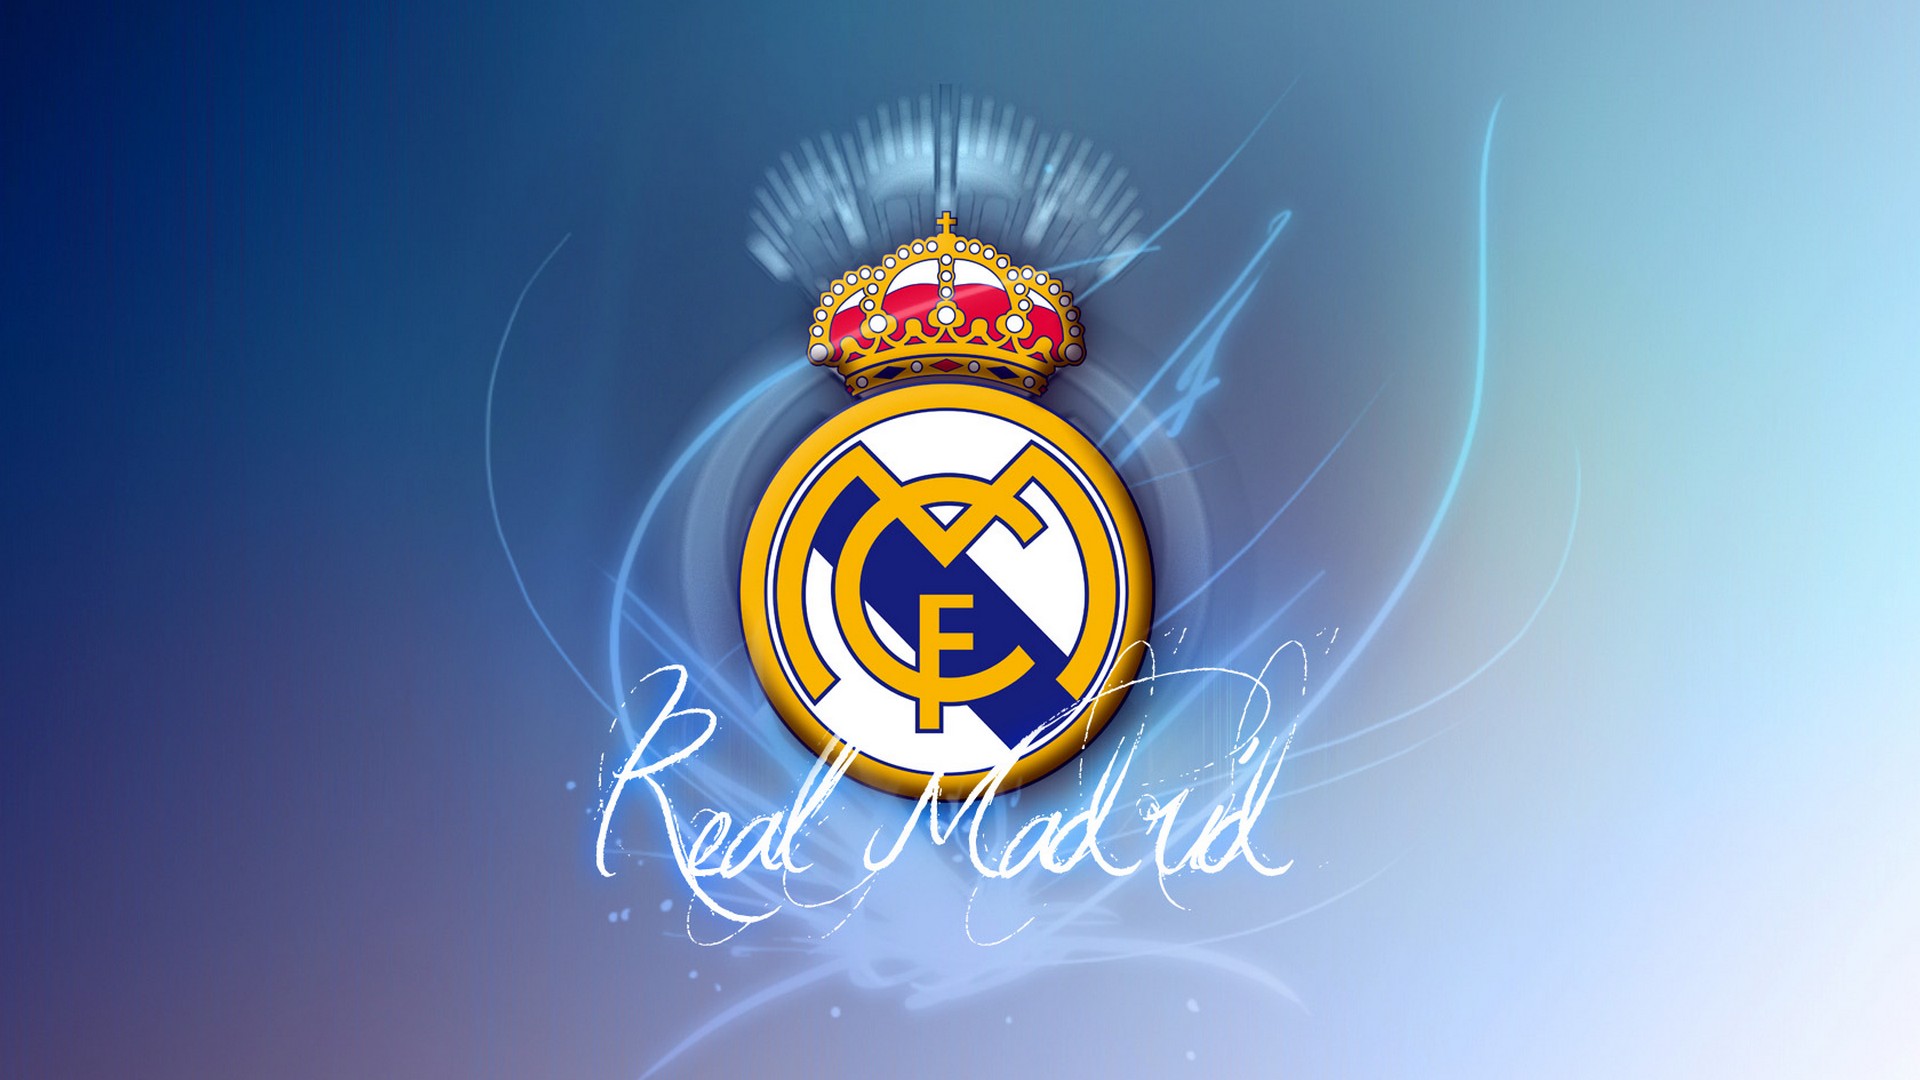 HD Real Madrid Backgrounds with resolution 1920x1080 pixel. You can make this wallpaper for your Mac or Windows Desktop Background, iPhone, Android or Tablet and another Smartphone device